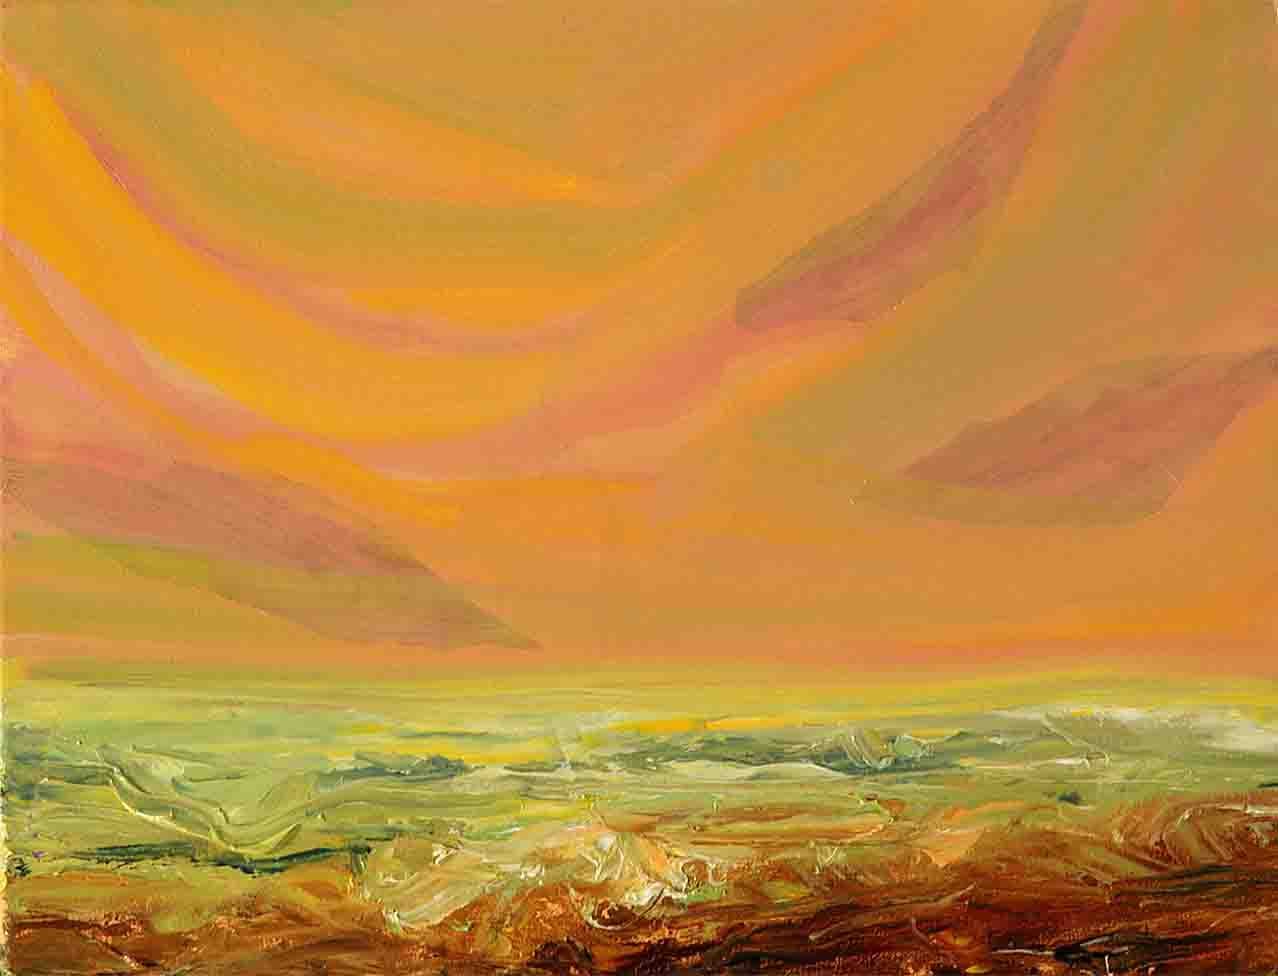 Painting of a raging sea orange like the sky, which also has some red areas. small size, horizontal, oil on canvas